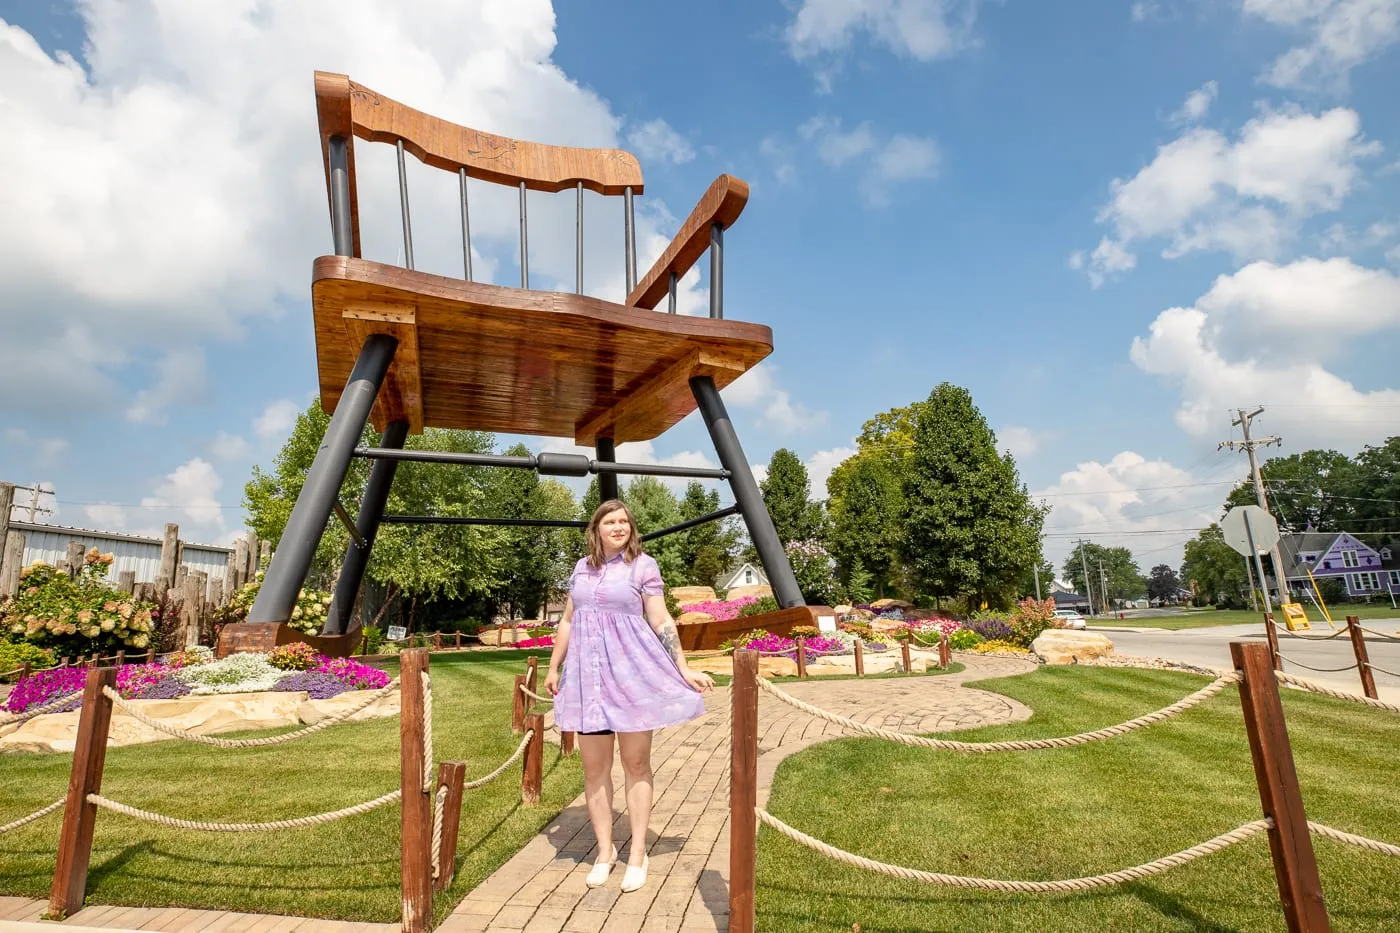 World's Largest Rocking Chair in Casey, Illinois roadside attraction